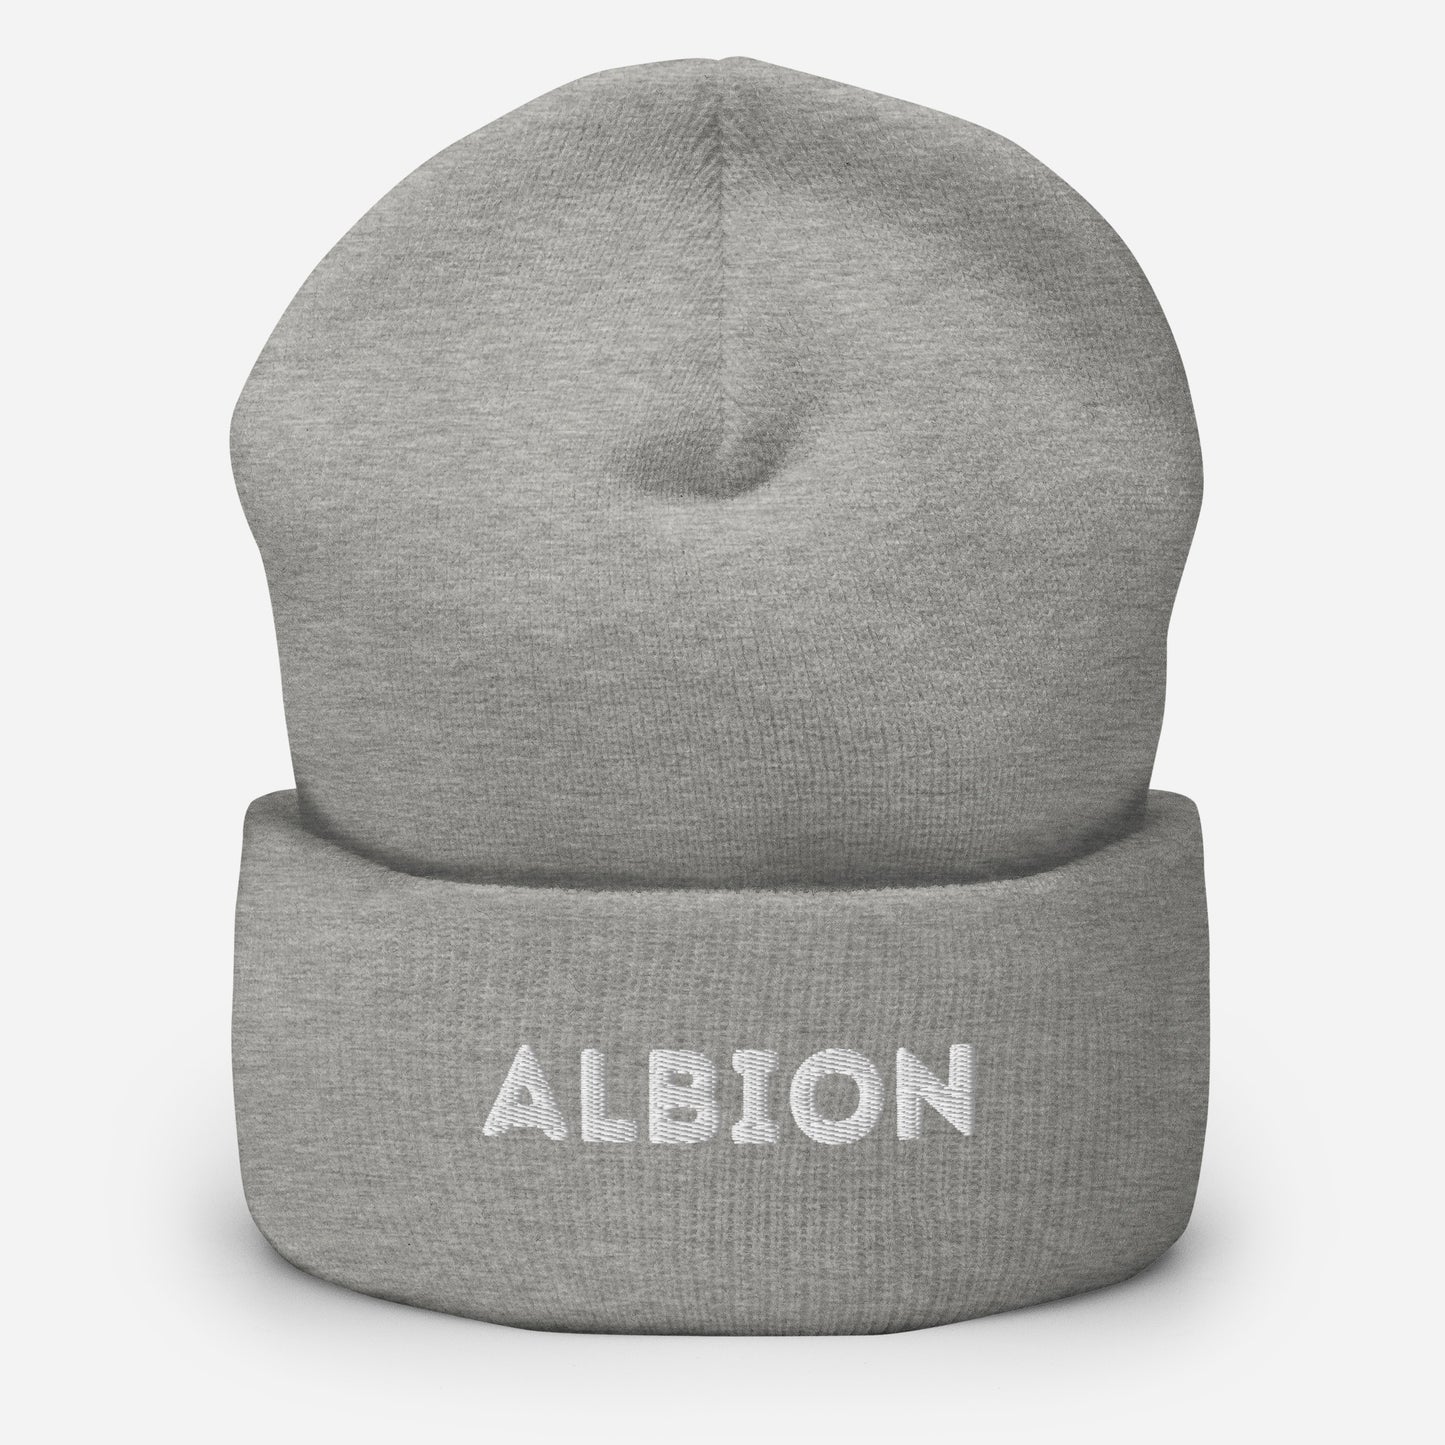 Albion (White embroidery) Cuffed Beanie Hat